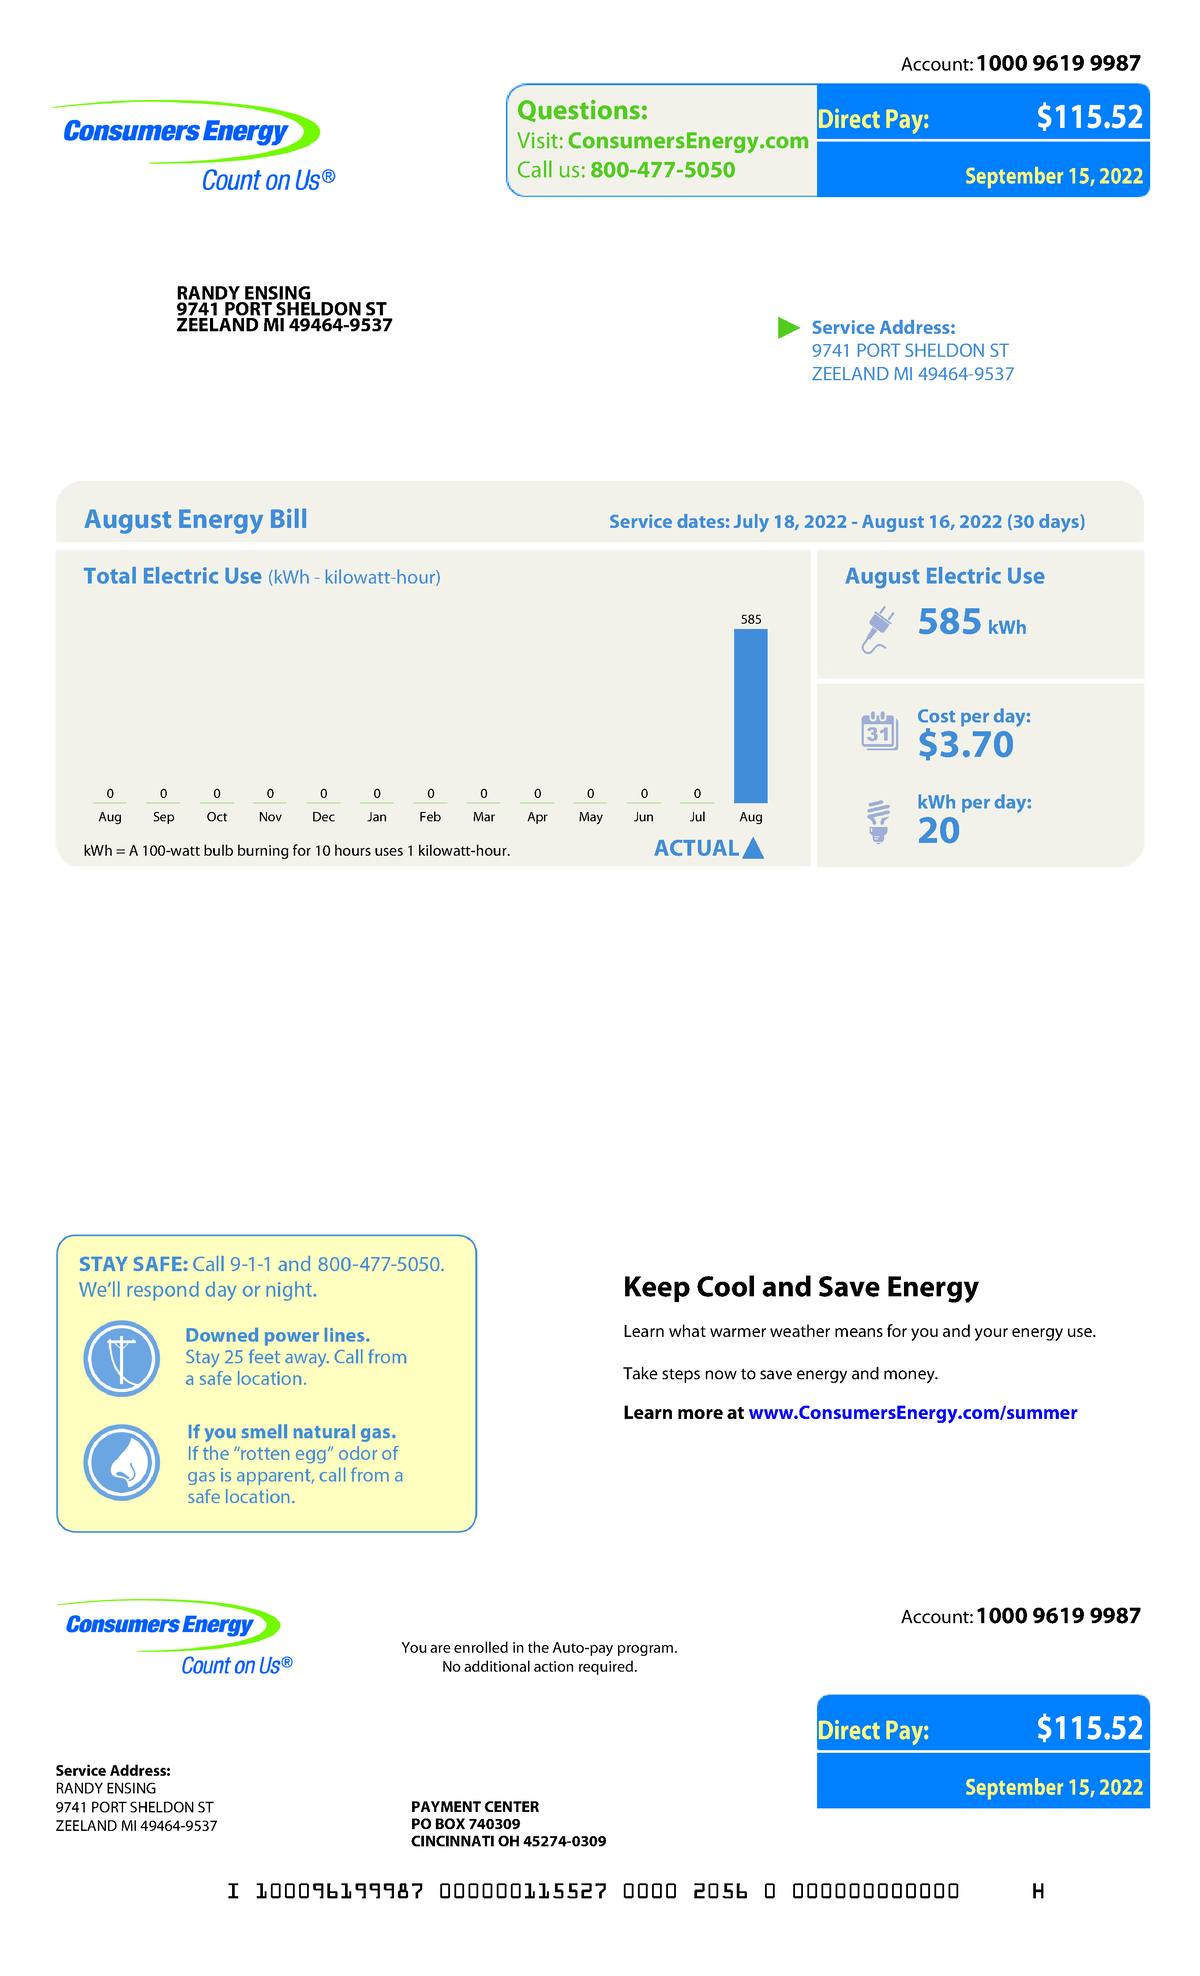 consumers-energy-bill-9998-12-31-9987-you-are-enrolled-in-the-auto